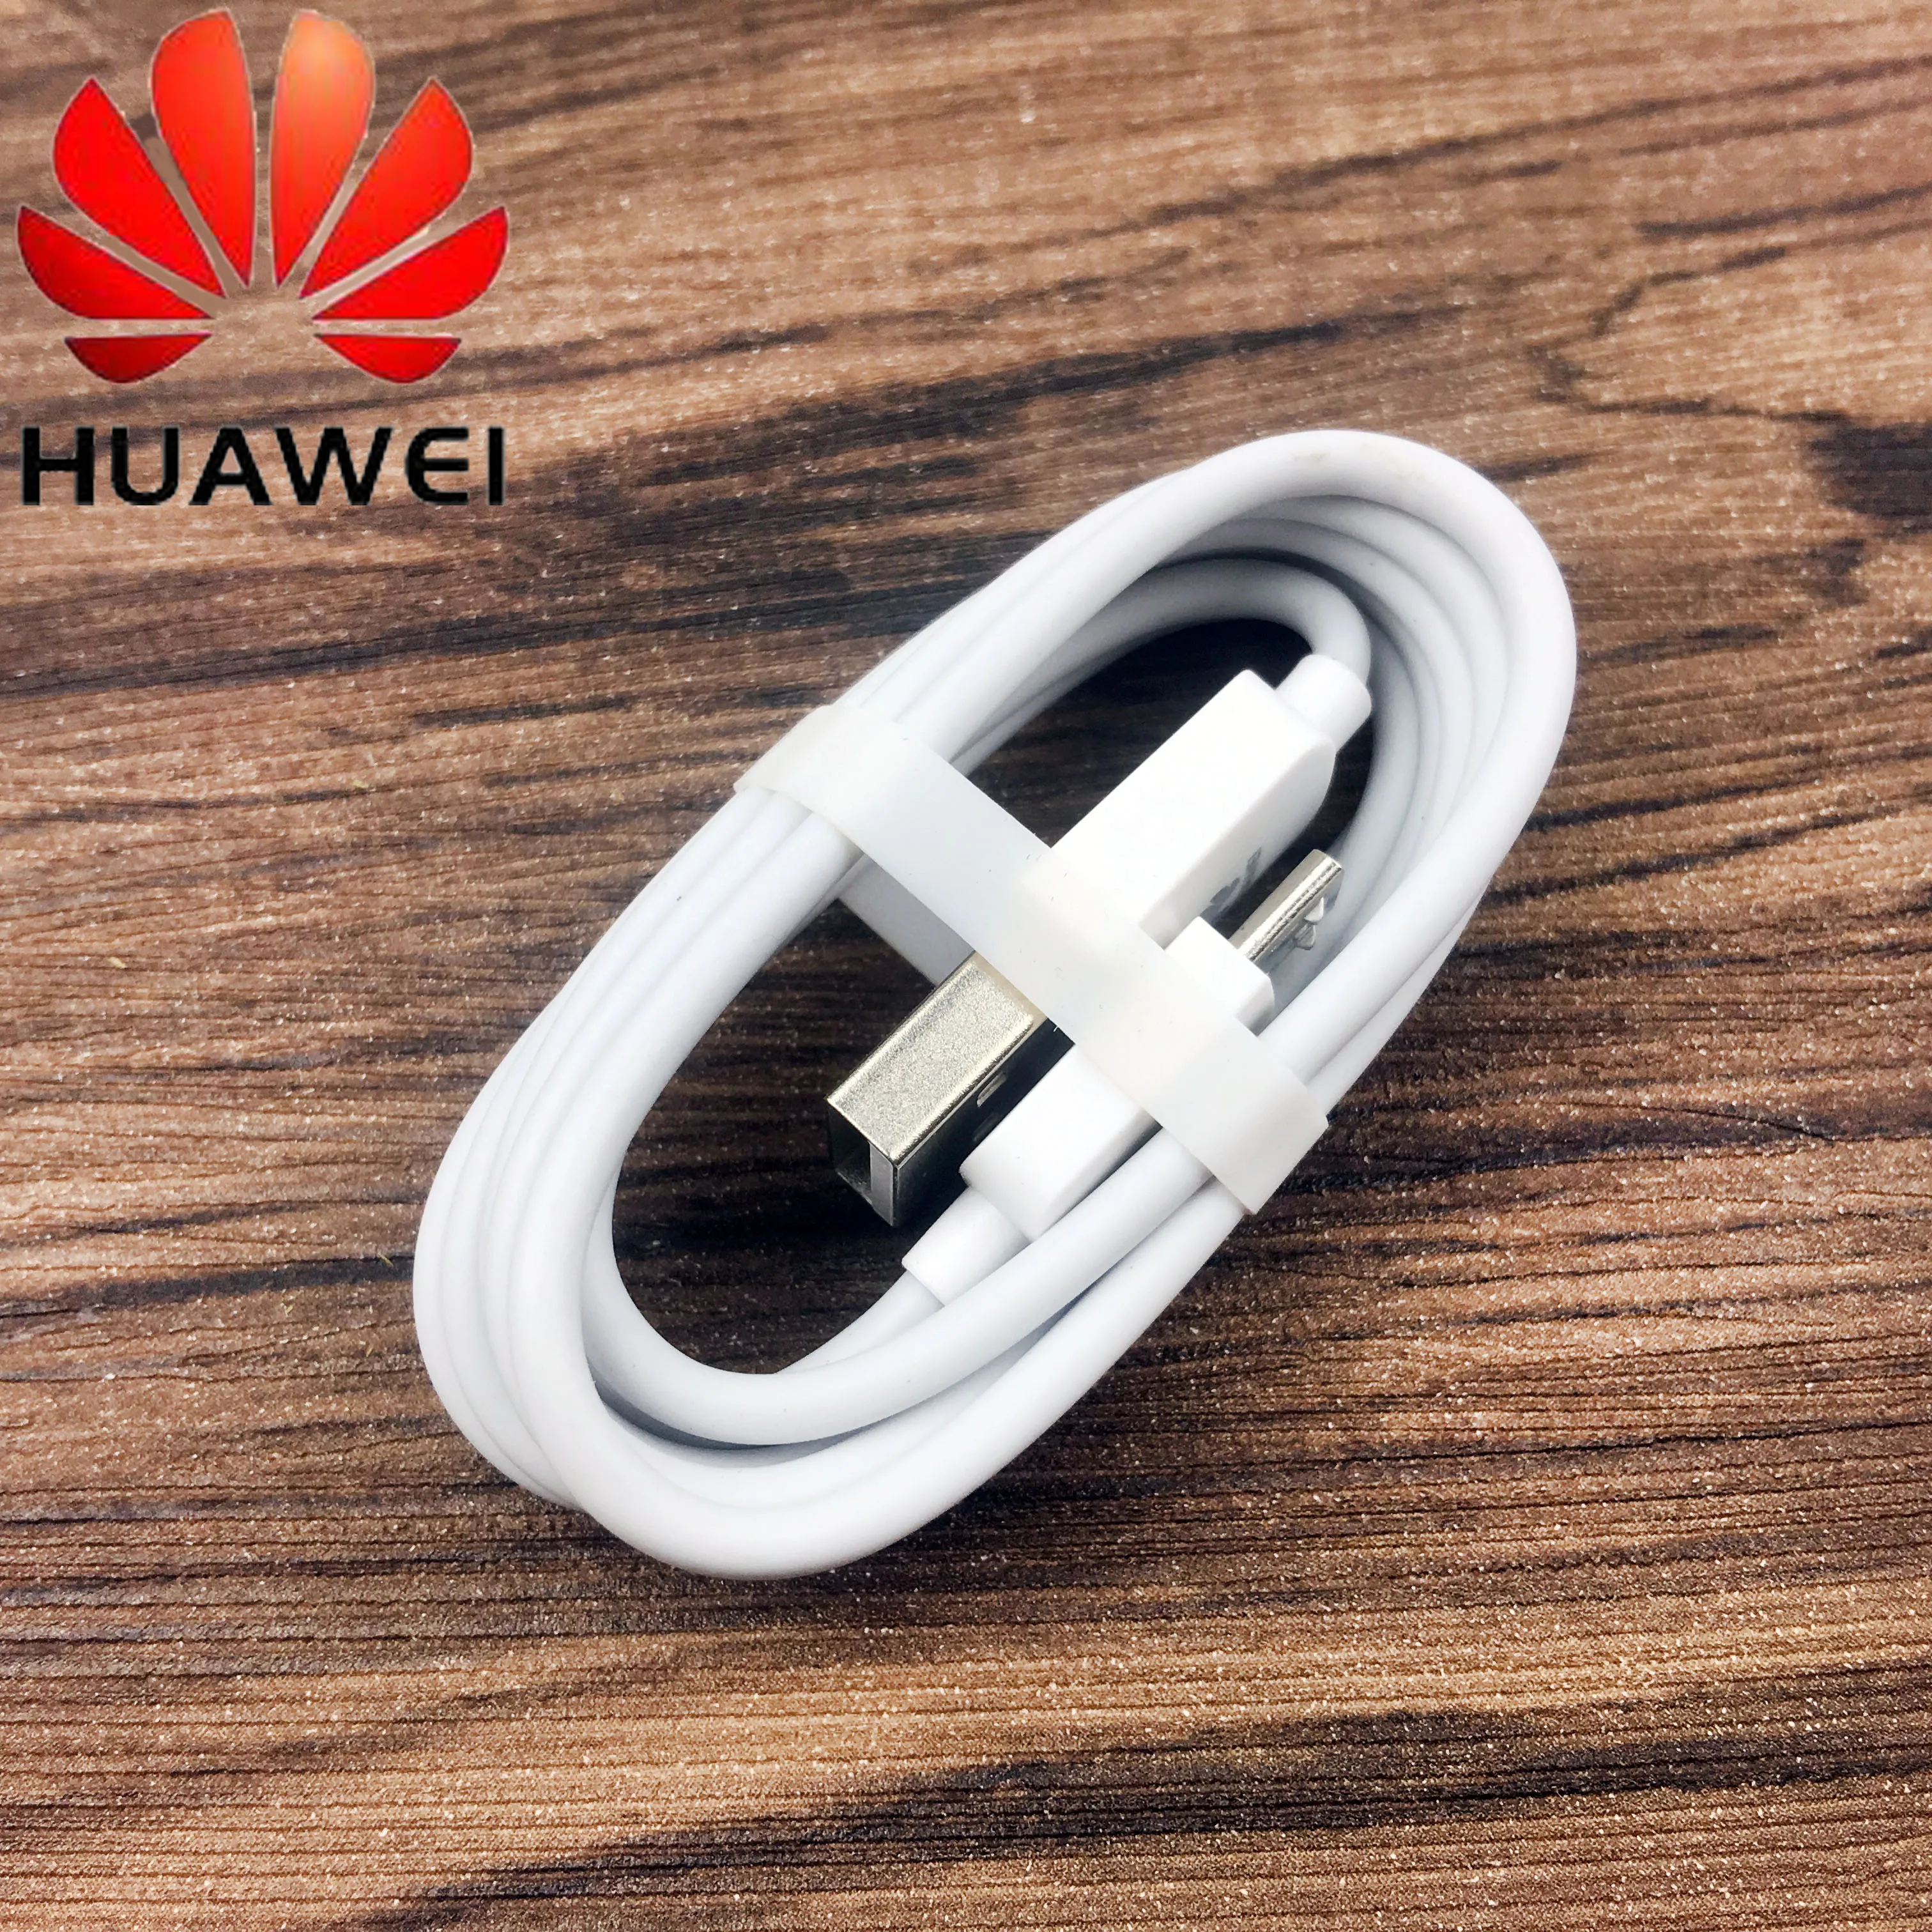 

Original Huawei Honor 7x Charging 1a Micro cable USB for honor 7x 3c 3x 4a 4c 4x g7 p7 p6 5c 6a 5x 6 6c 6x 100cm charger cable